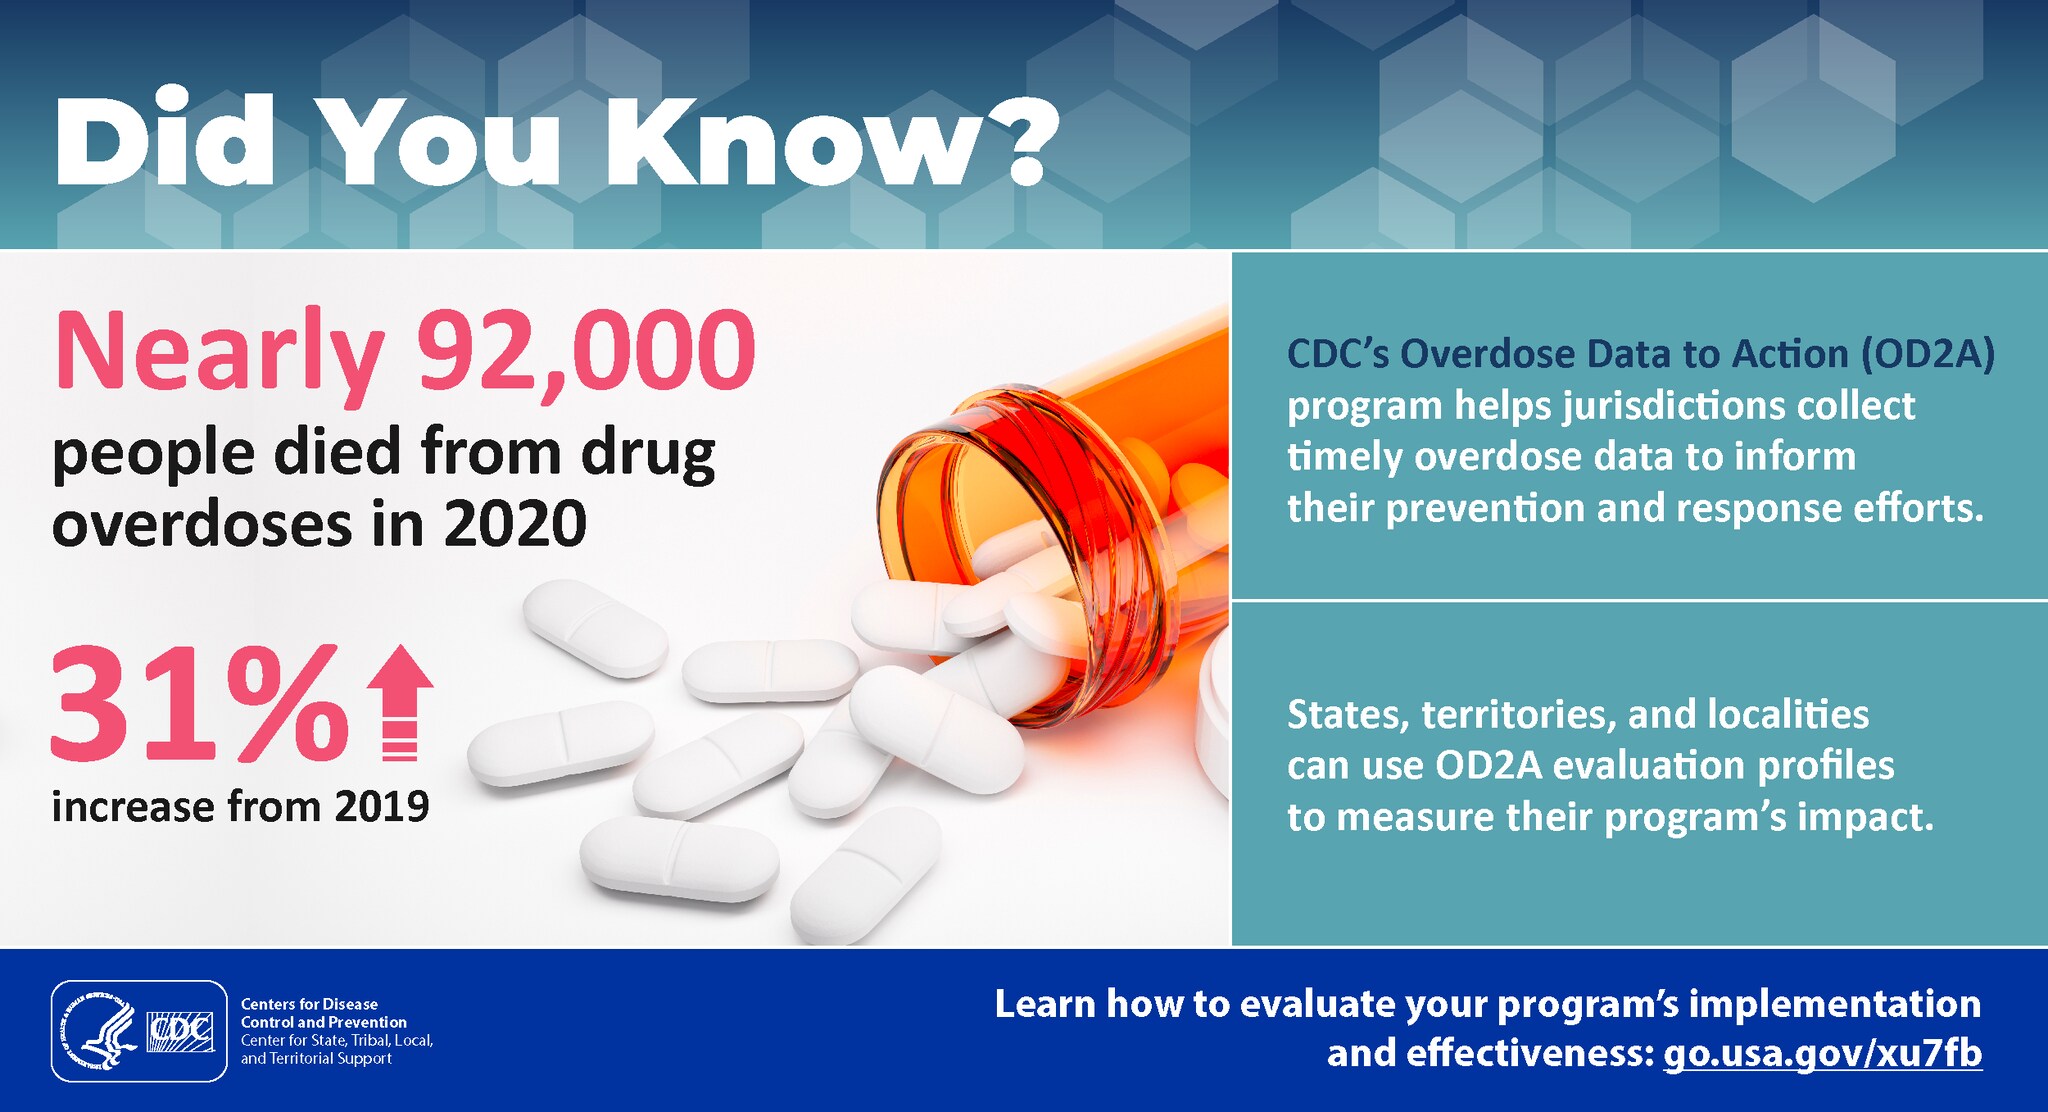 Did You Know? Nearly 92,000 people died from drug overdoses in 2020, a 31% increase from 2019. CDC’s Overdose Data to Action (OD2A) program helps jurisdictions collect timely overdose data to inform their prevention and response efforts. States, territories, and localities can use OD2A evaluation profiles to measure their program’s impact. Learn how to evaluate your program’s implementation and effectiveness https://go.usa.gov/xu7fb